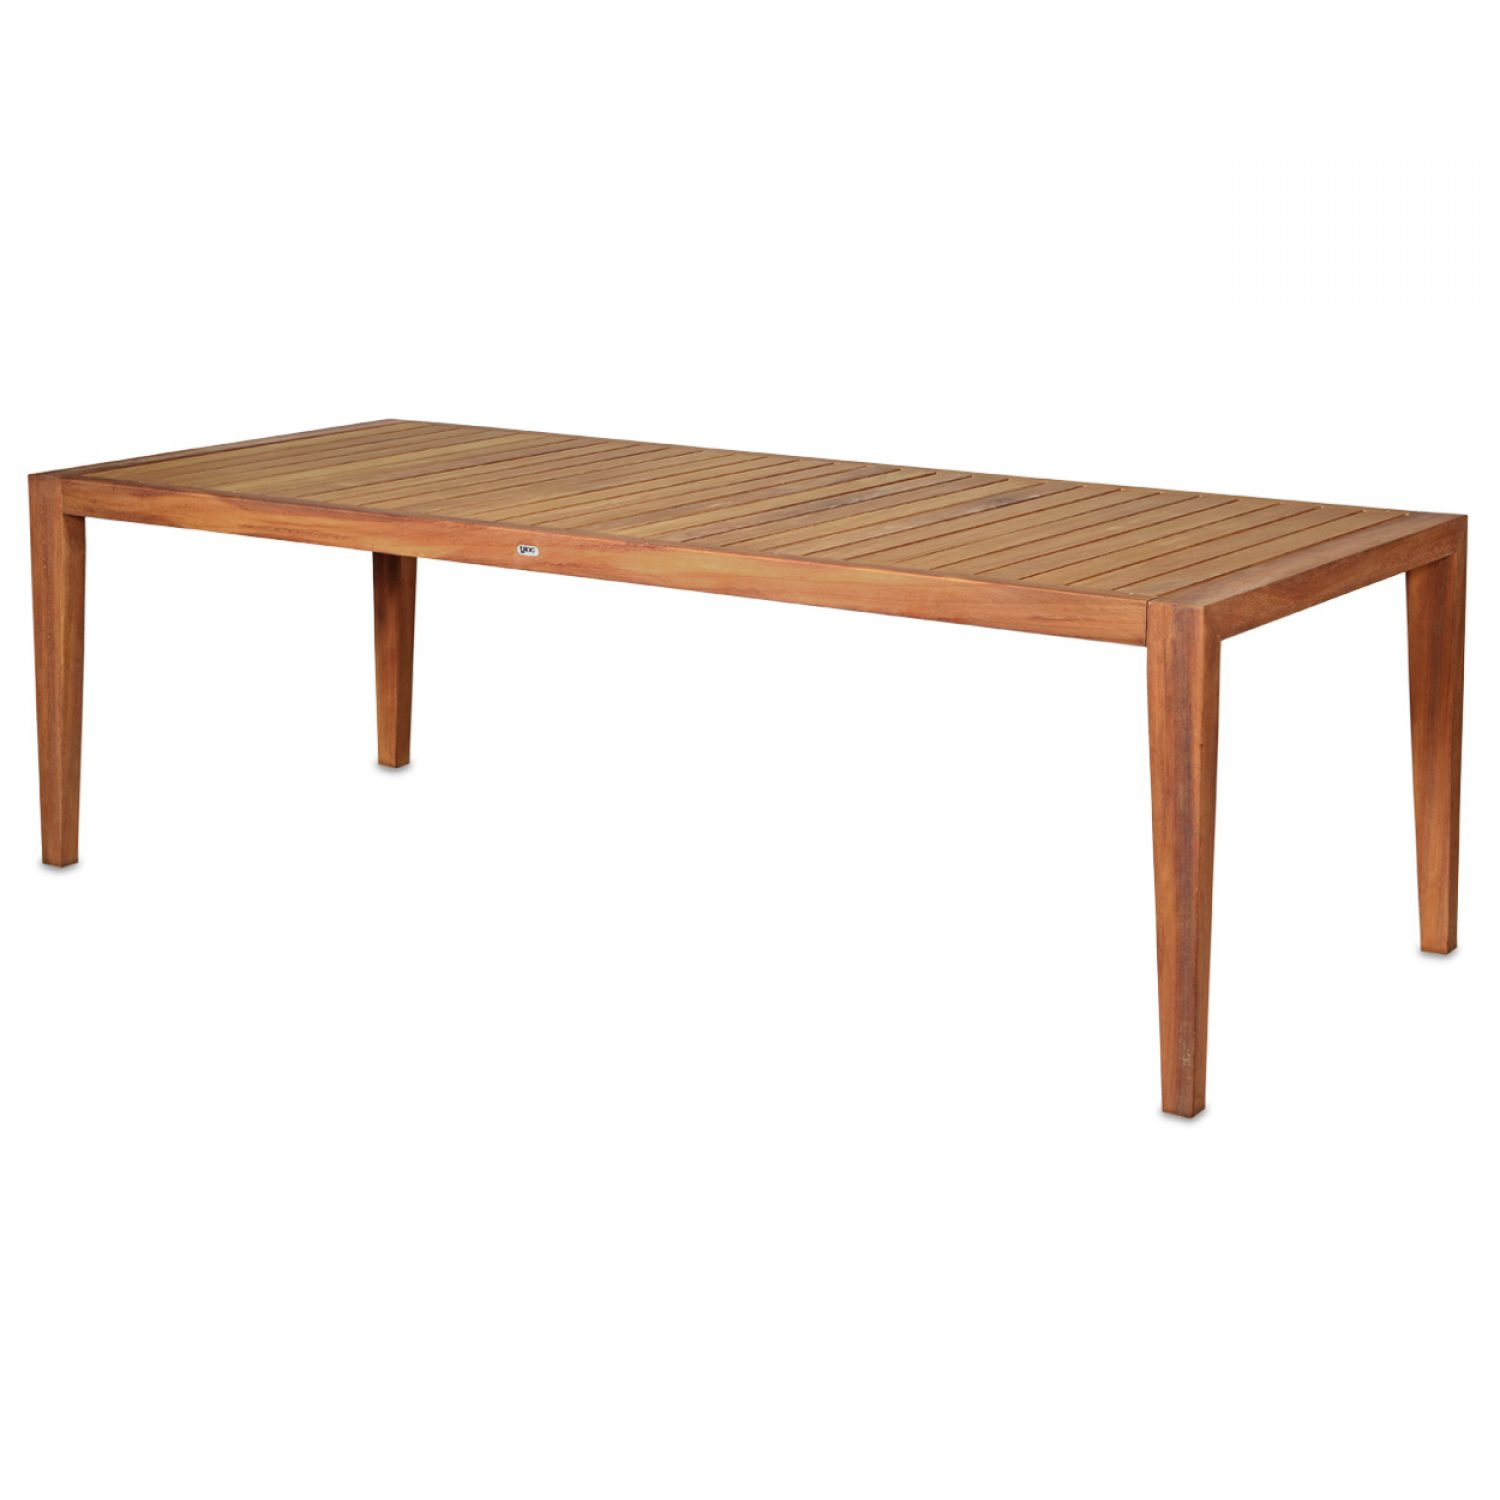 Barcelona Timber Dining Table